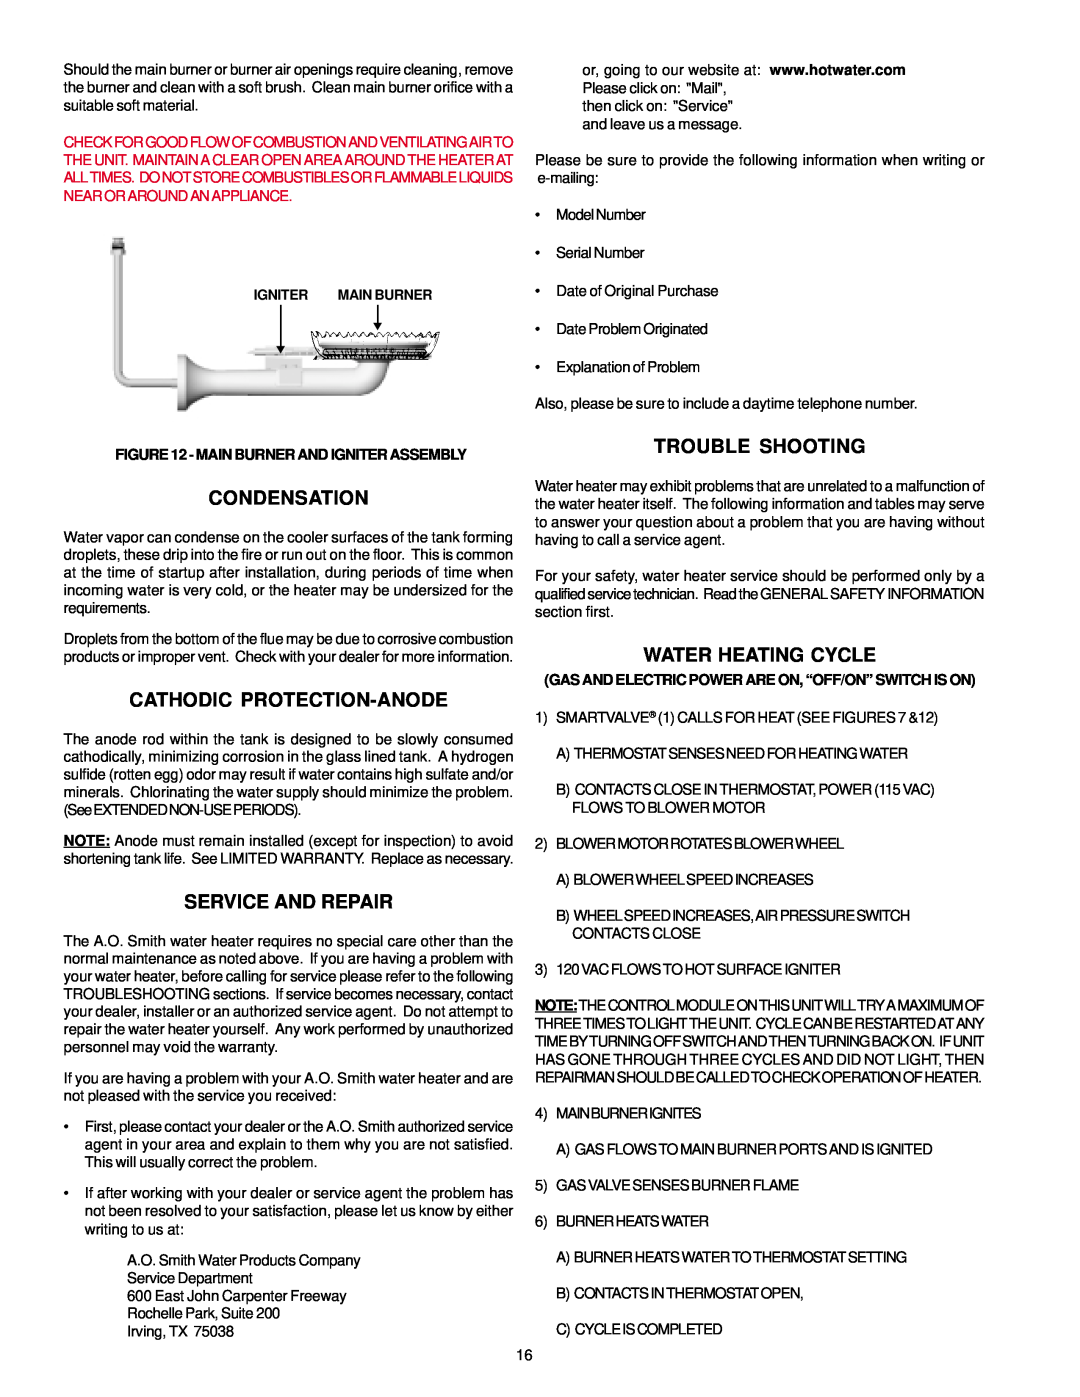 A.O. Smith BTF-75 Condensation, Cathodic Protection-Anode, Service And Repair, Trouble Shooting, Water Heating Cycle 